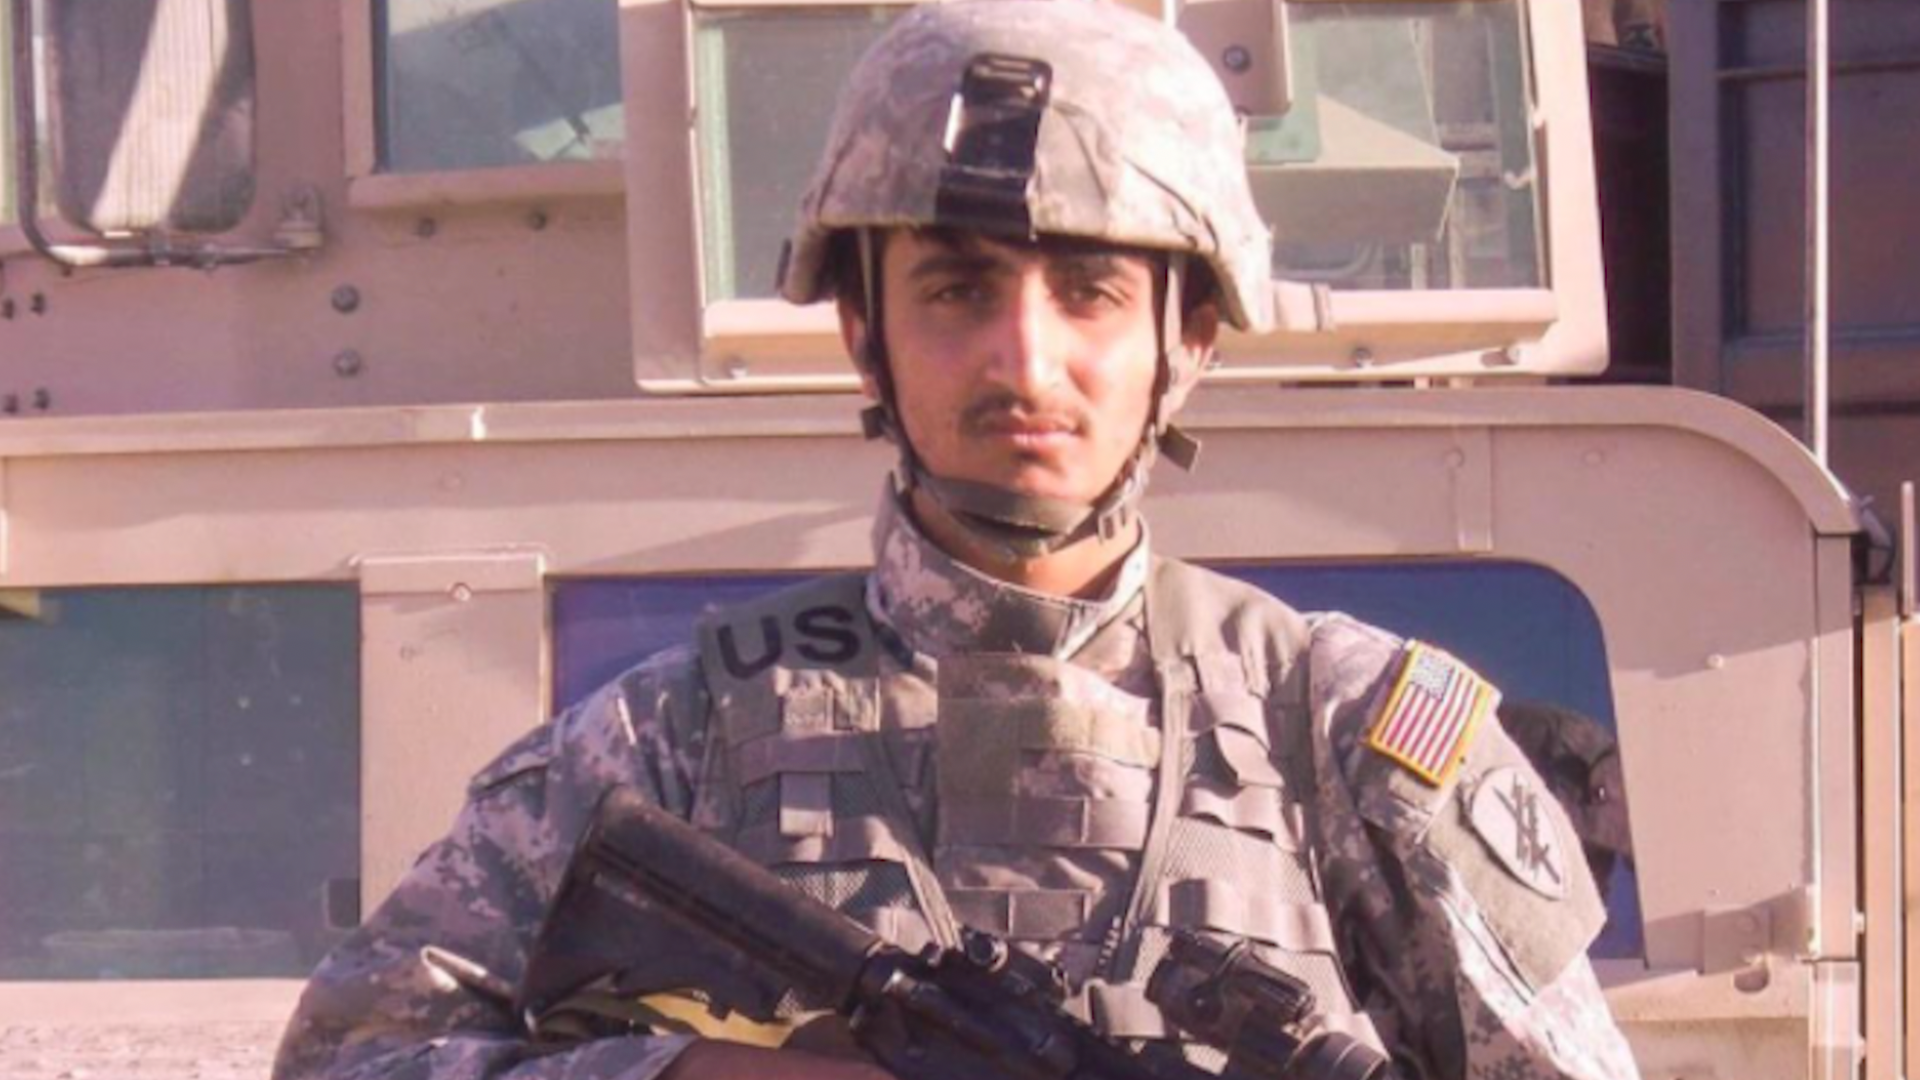 Zalmay Niazy became a translator for US Military forces in Afghanistan at age 19. After the Taliban threatened his life, he sought asylum in the US. It was denied.